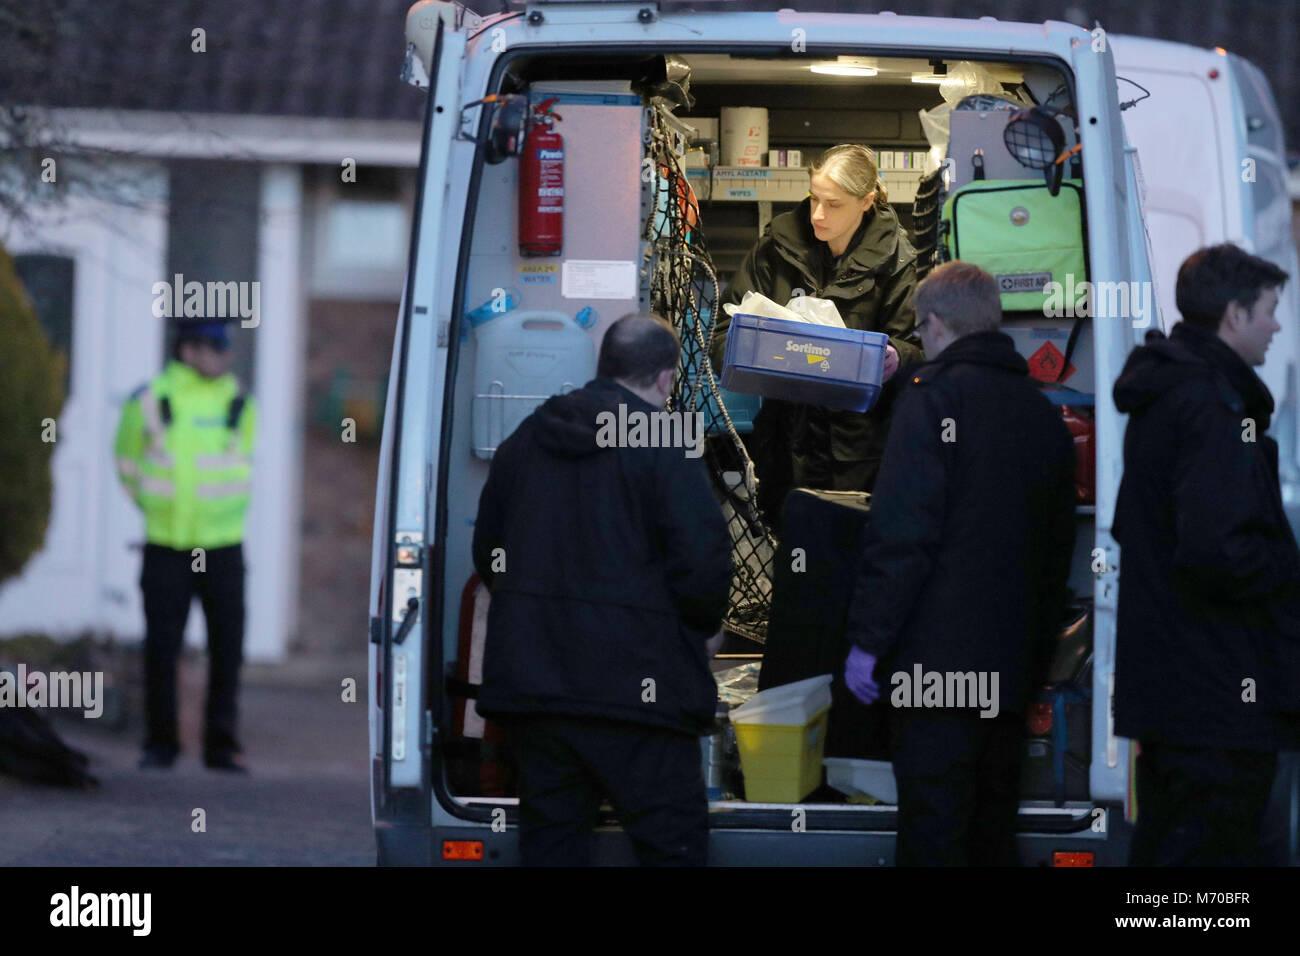 Police activity in the cul-de-sac in Salisbury that contains the home of former Russian double agent Sergei Skripal who was poisoned along with daughter Yulia with a nerve agent. Stock Photo